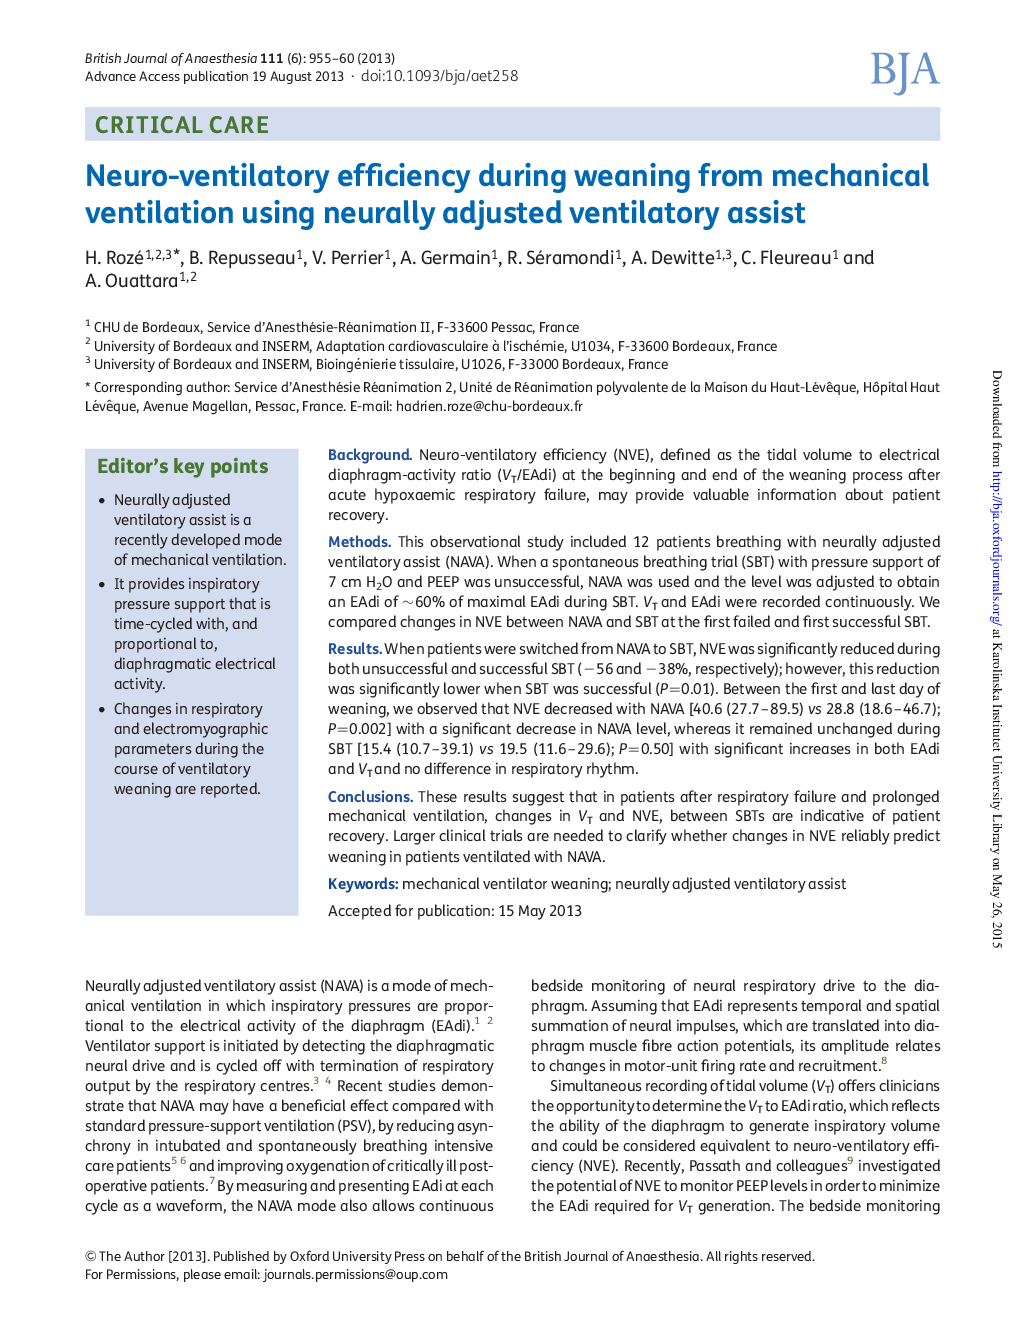 Neuro-ventilatory efficiency during weaning from mechanical ventilation using neurally adjusted ventilatory assist